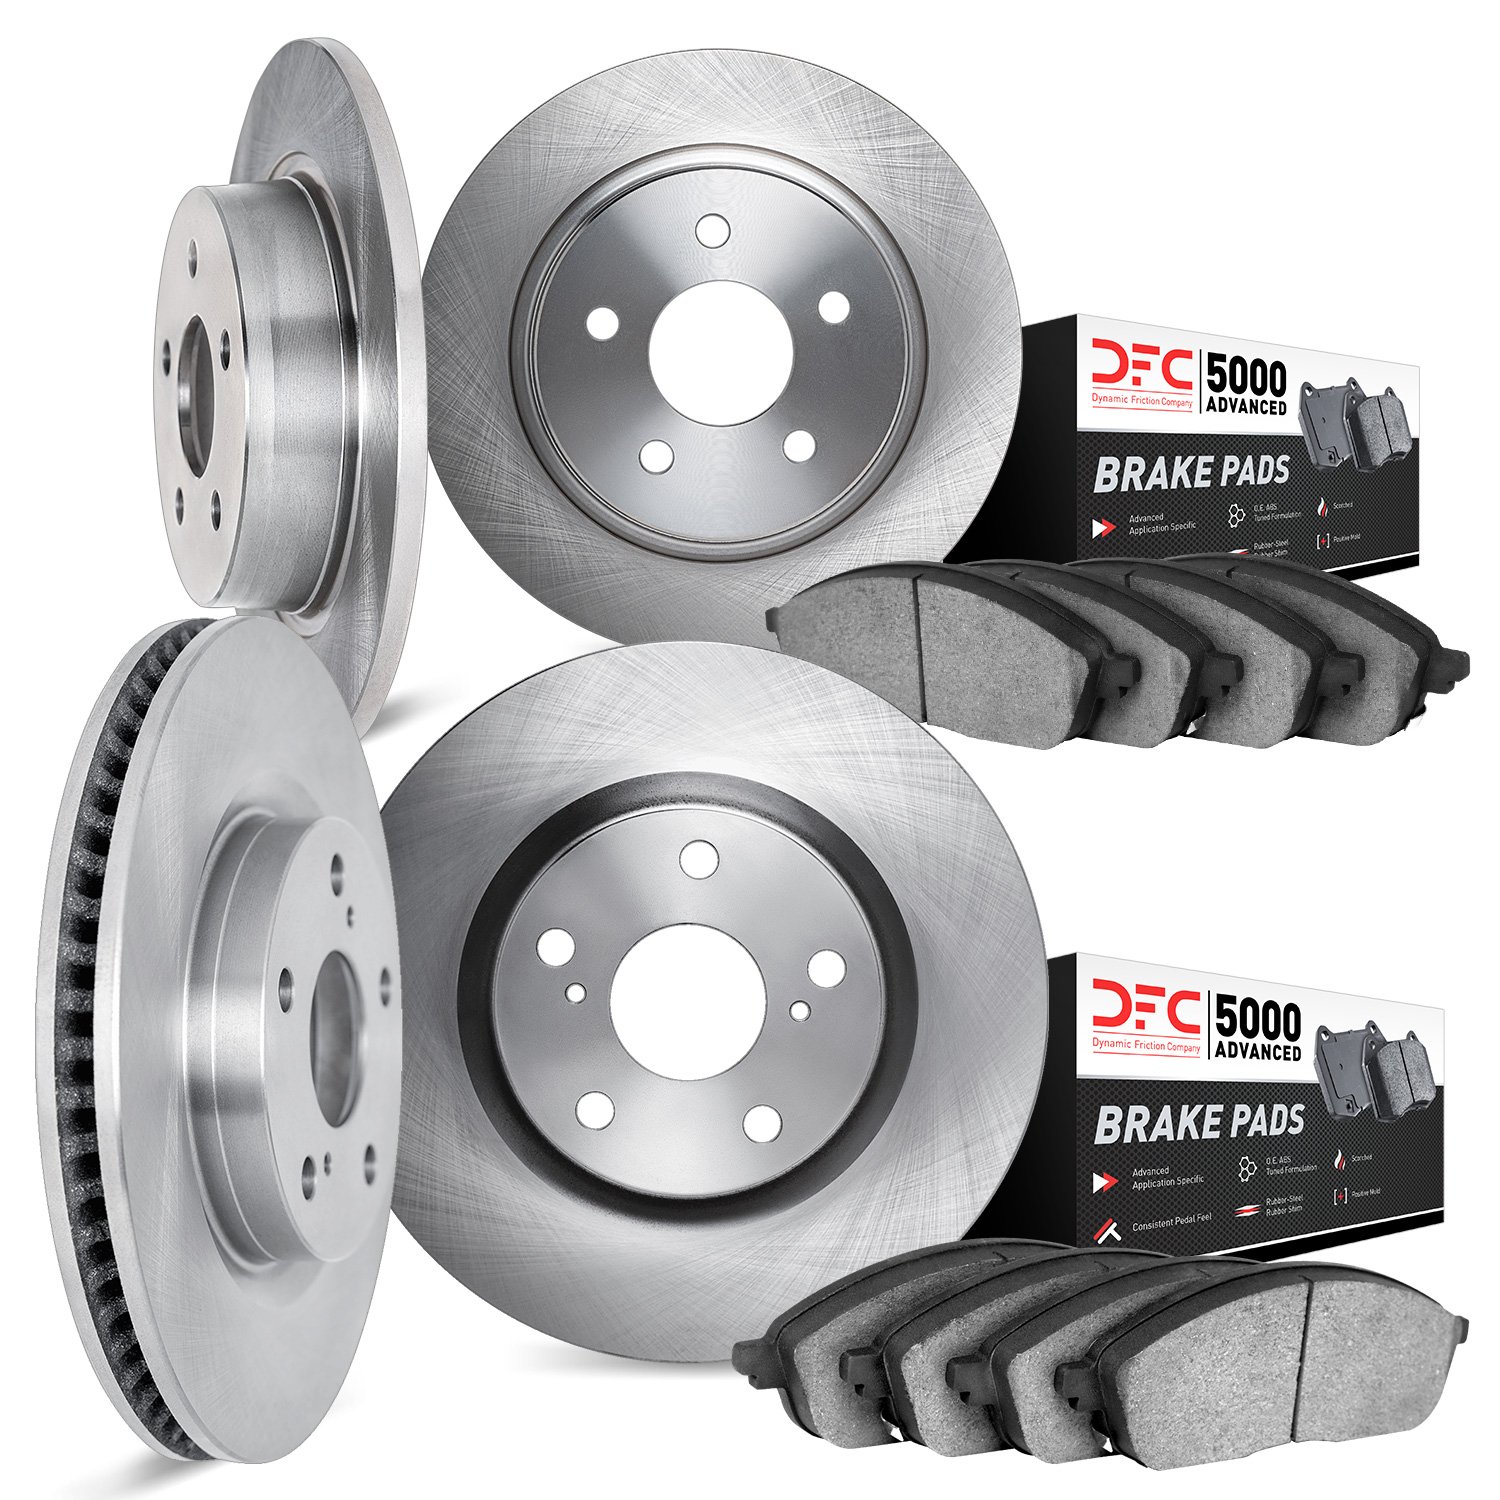 6504-47920 Brake Rotors w/5000 Advanced Brake Pads Kit, Fits Select GM, Position: Front and Rear